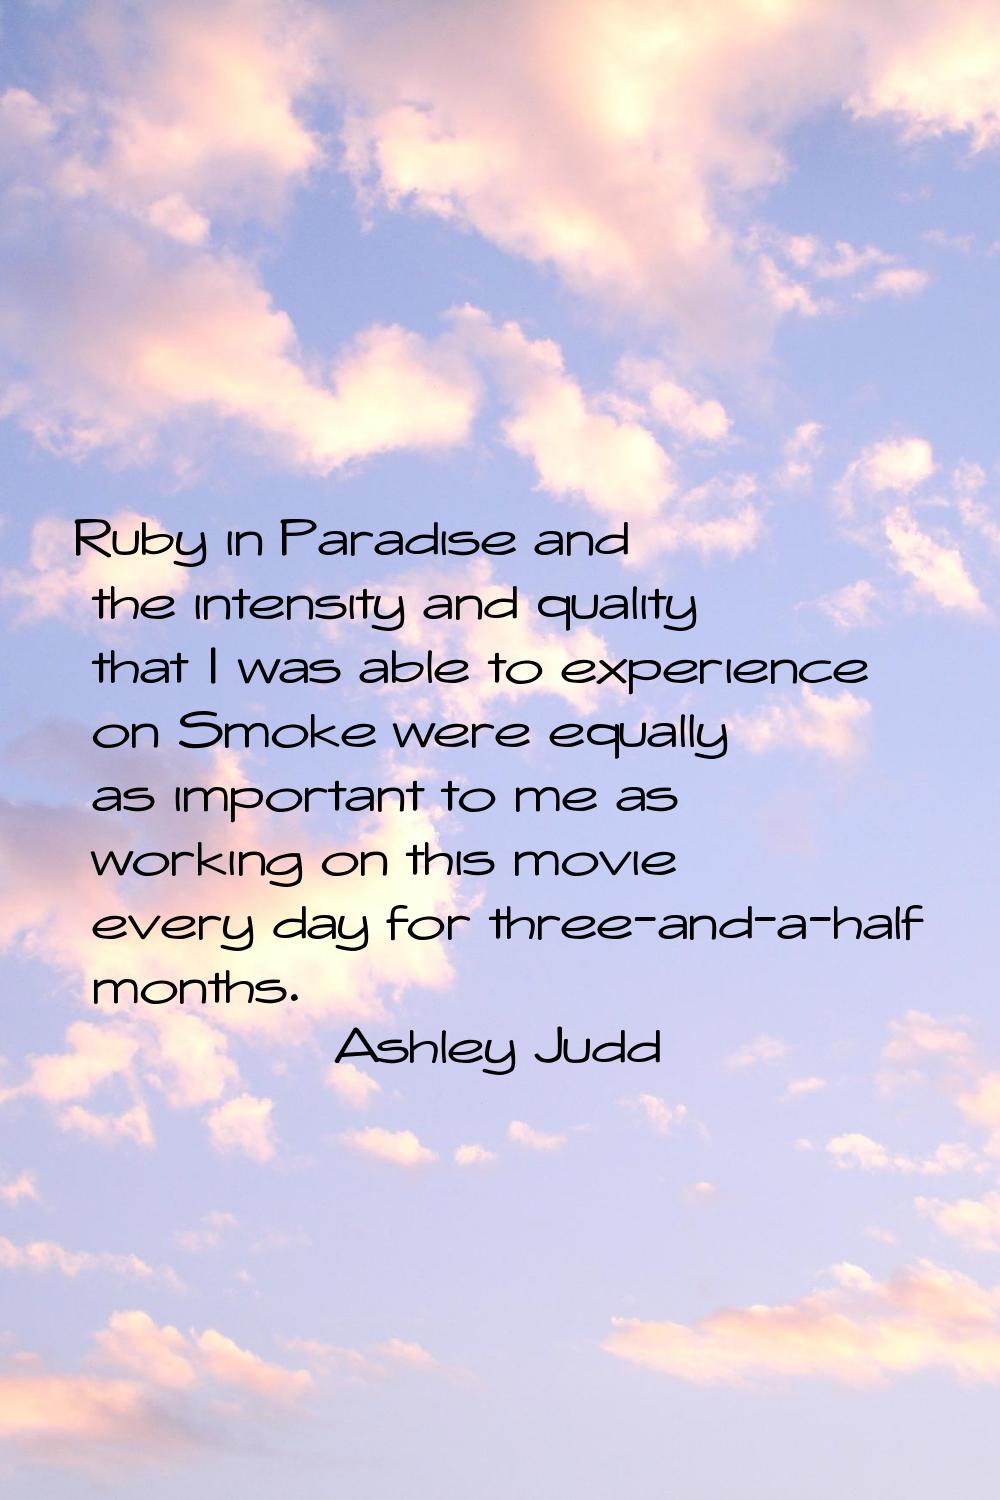 Ruby in Paradise and the intensity and quality that I was able to experience on Smoke were equally 